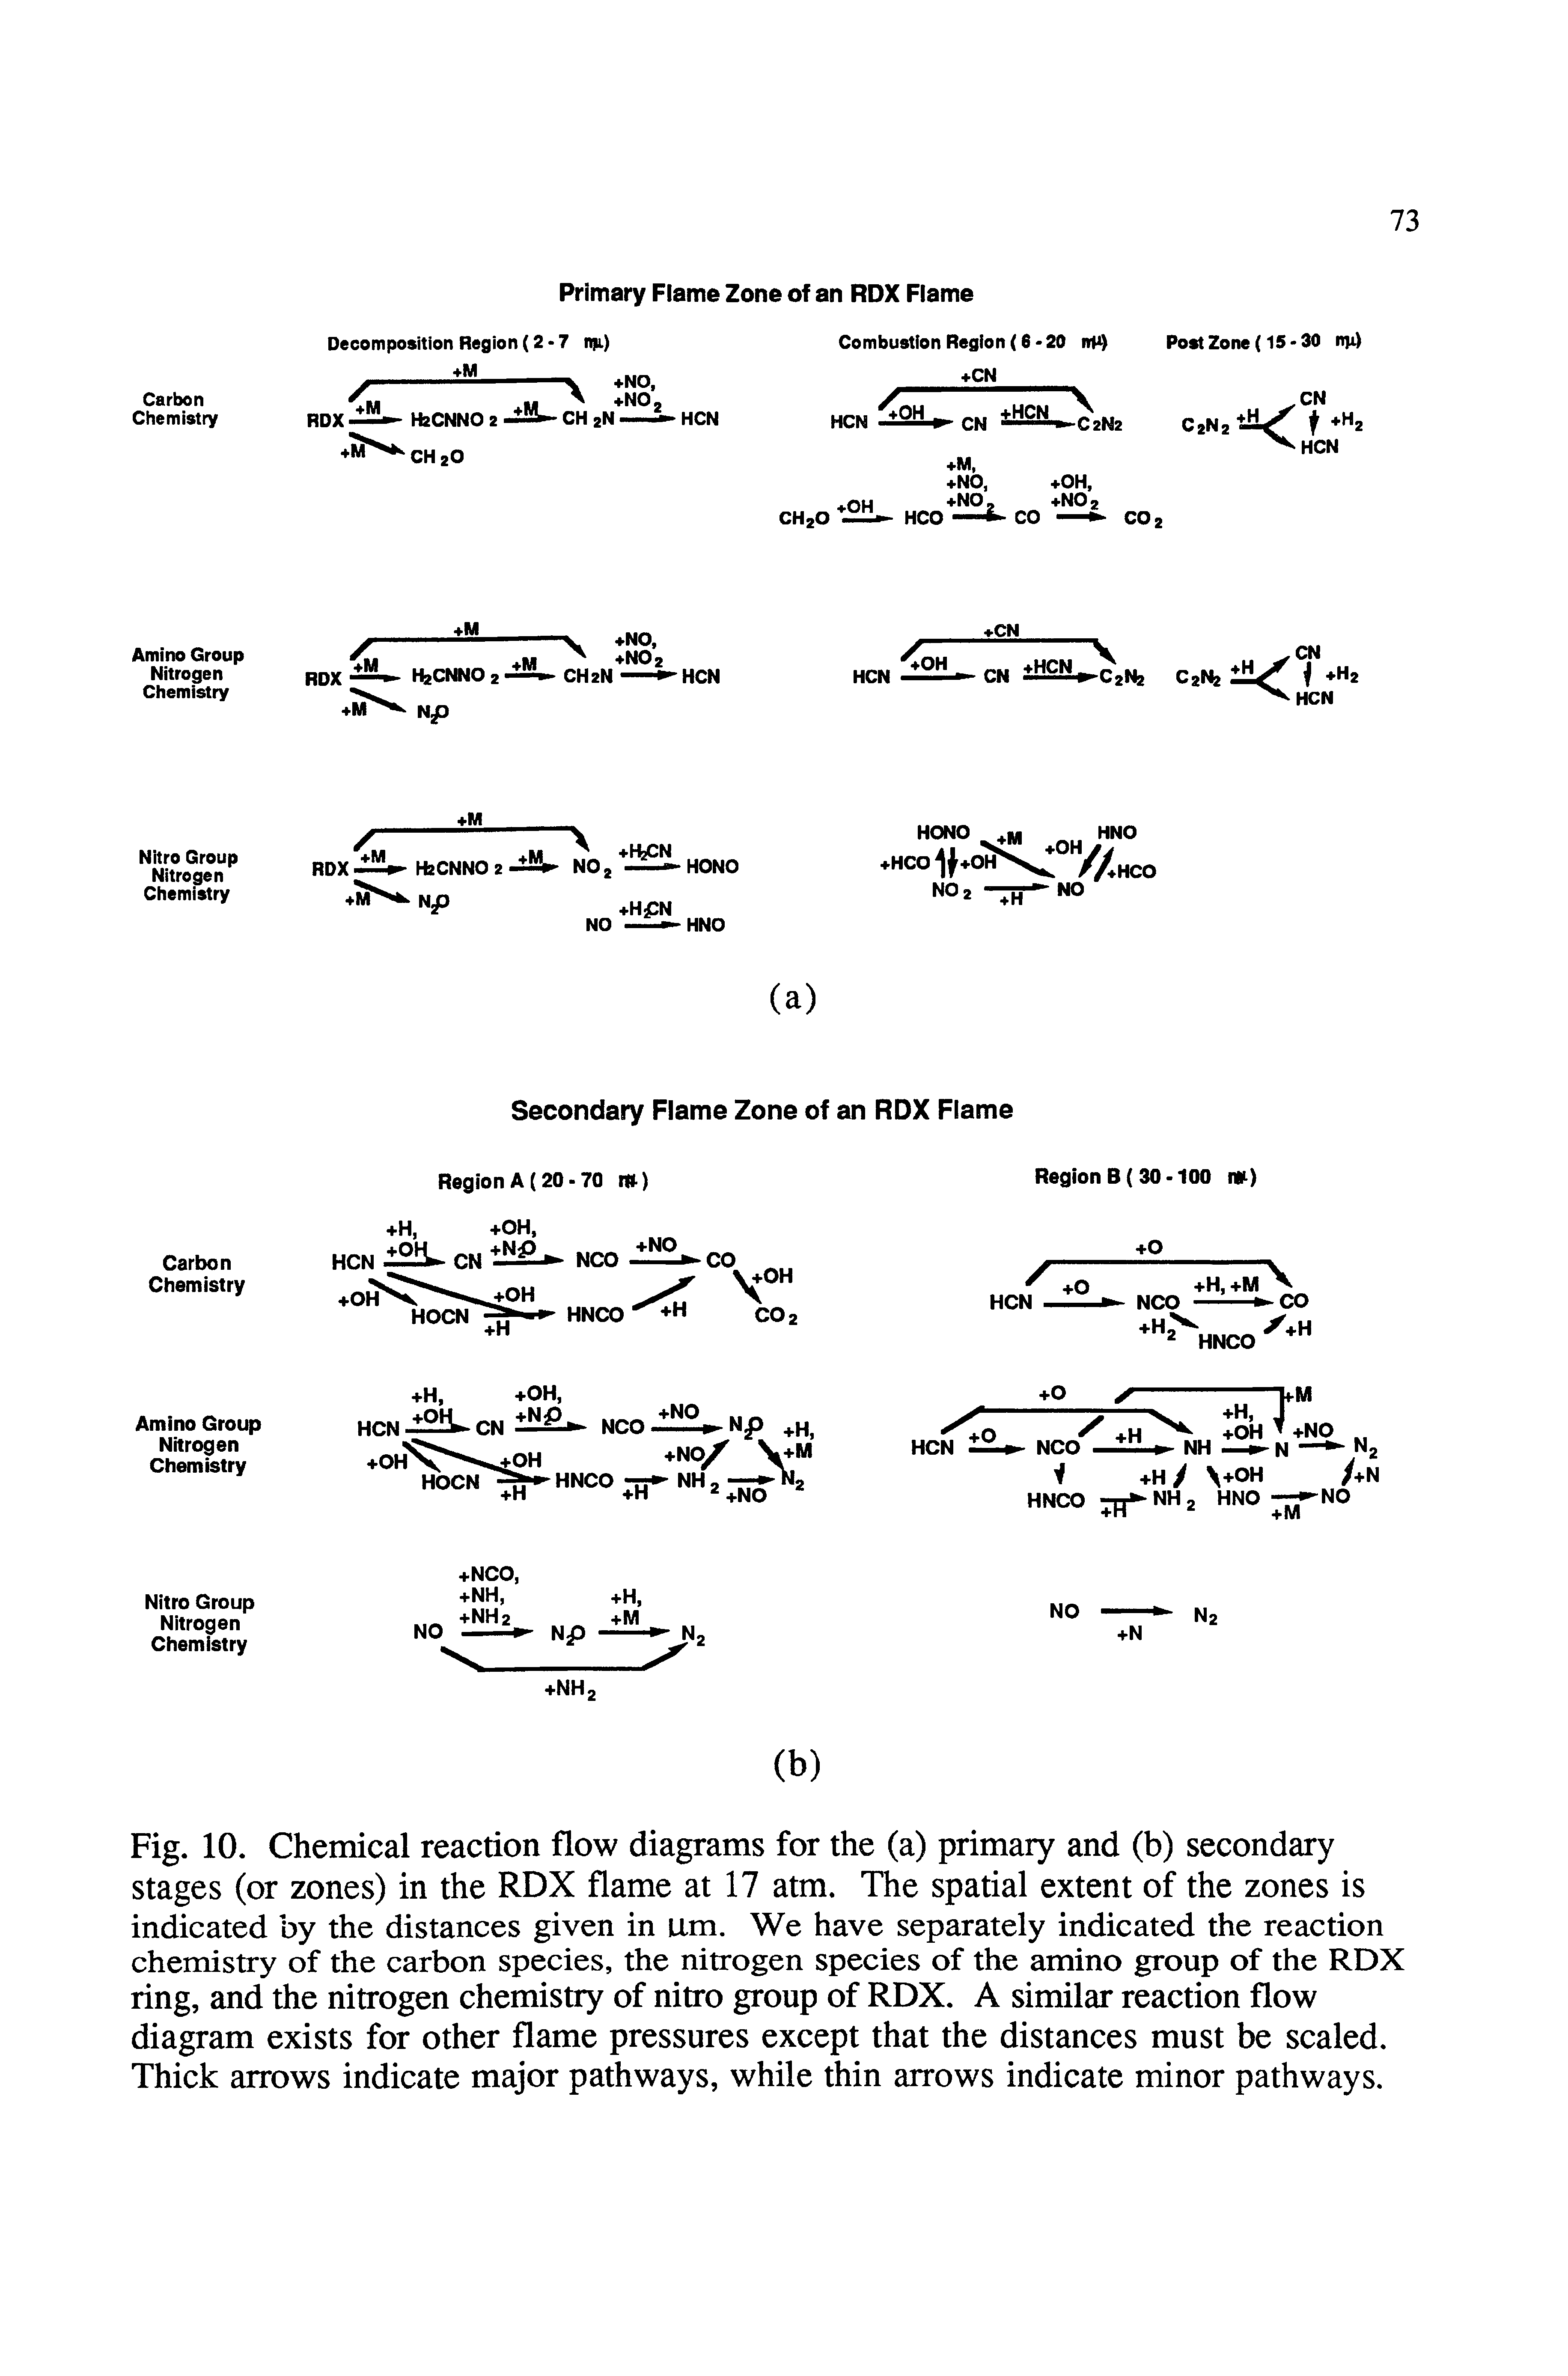 Fig. 10. Chemical reaction flow diagrams for the (a) primary and (b) secondary stages (or zones) in the RDX flame at 17 atm. The spatial extent of the zones is indicated by the distances given in um. We have separately indicated the reaction chemistry of the carbon species, the nitrogen species of the amino group of the RDX ring, and the nitrogen chemistry of nitro group of RDX. A similar reaction flow diagram exists for other flame pressures except that the distances must be scaled. Thick arrows indicate major pathways, while thin arrows indicate minor pathways.